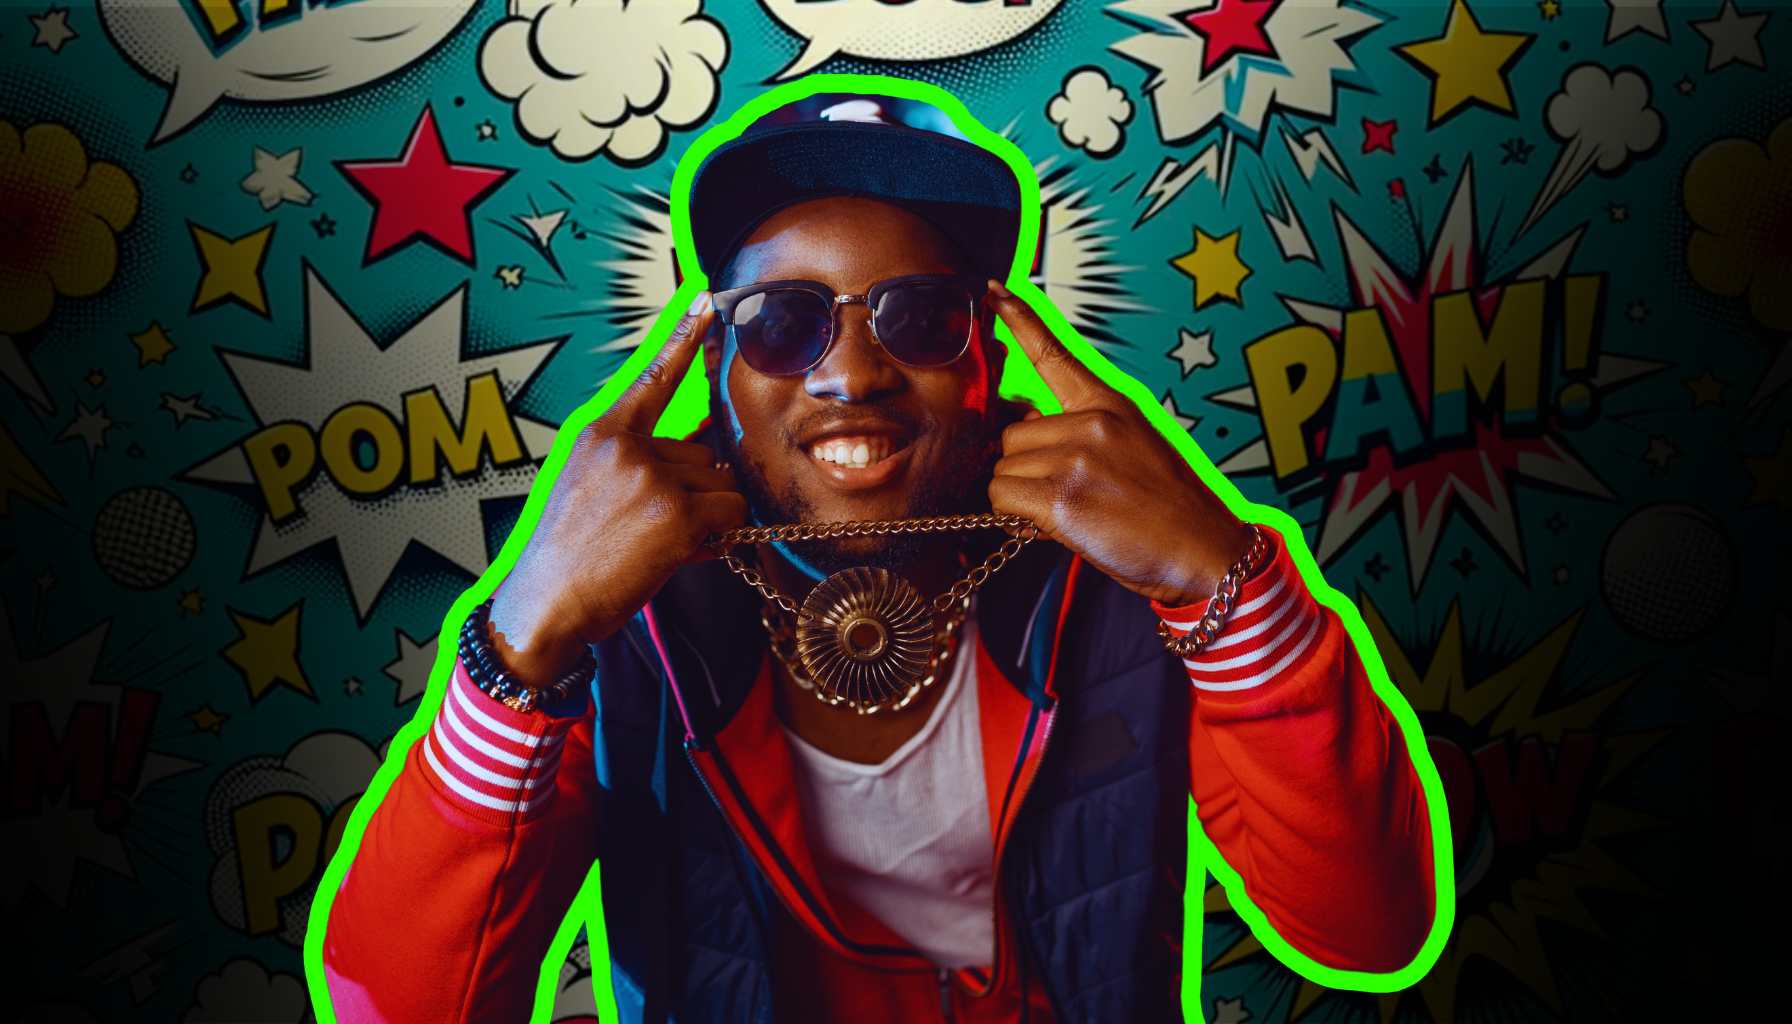 HipHop rapper holding his gold chain in front of a marketing and promotional banner background image for his TIkTok video shoot